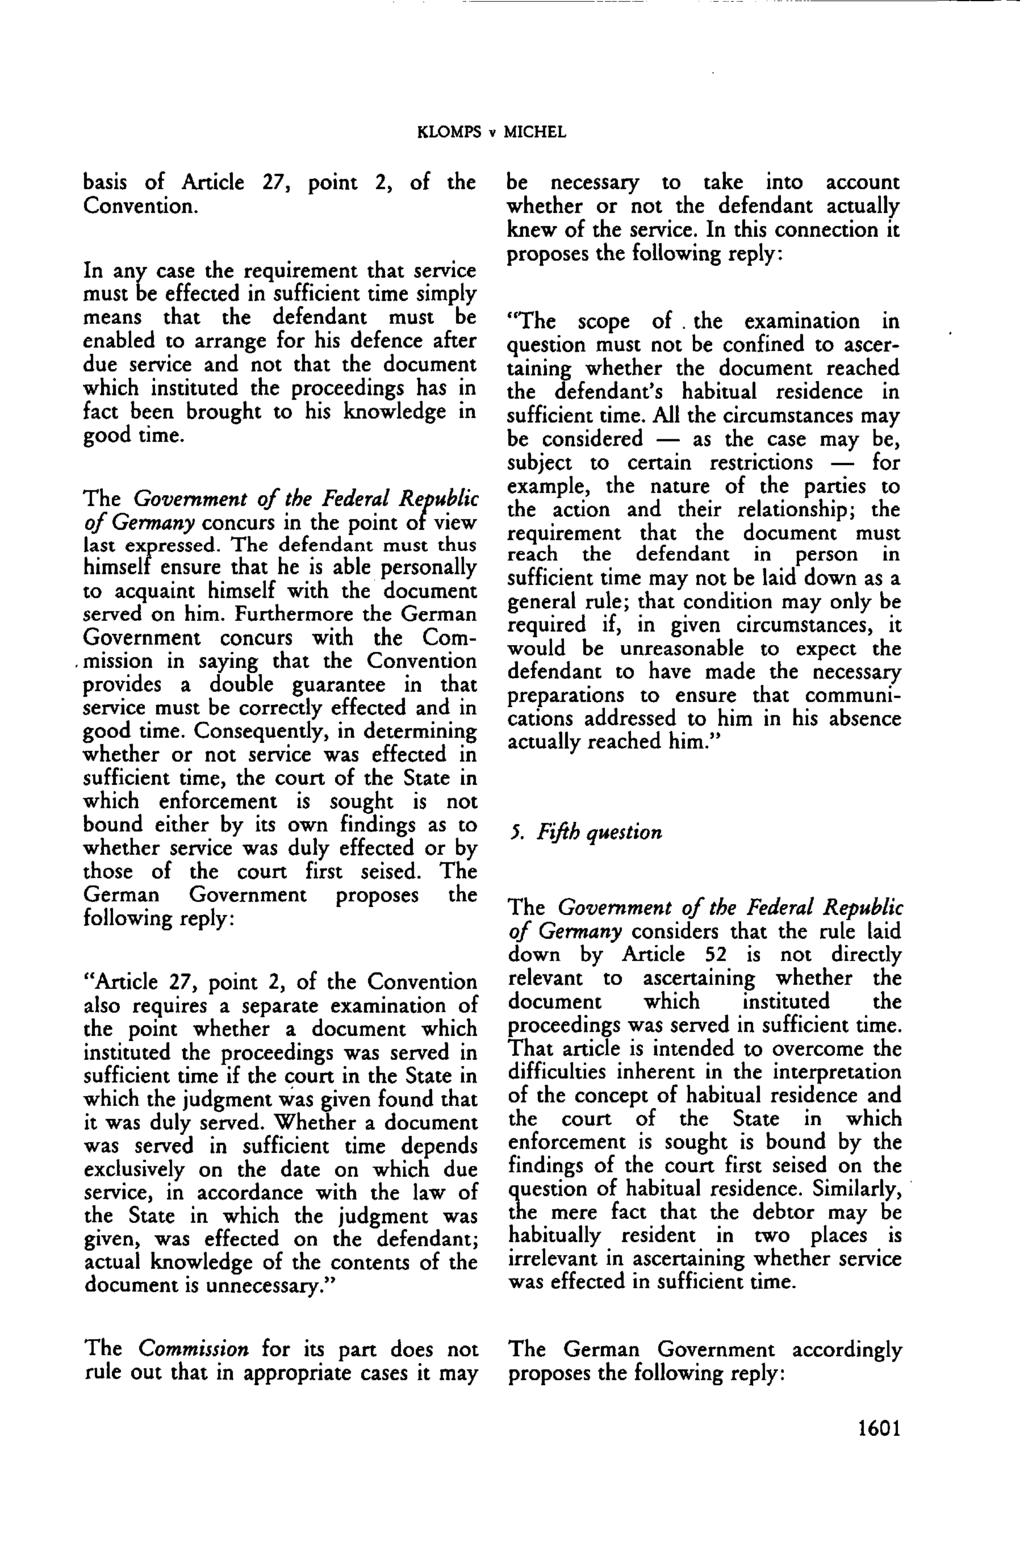 KLOMPS v MICHEL basis of Article 27, point 2, of the Convention.